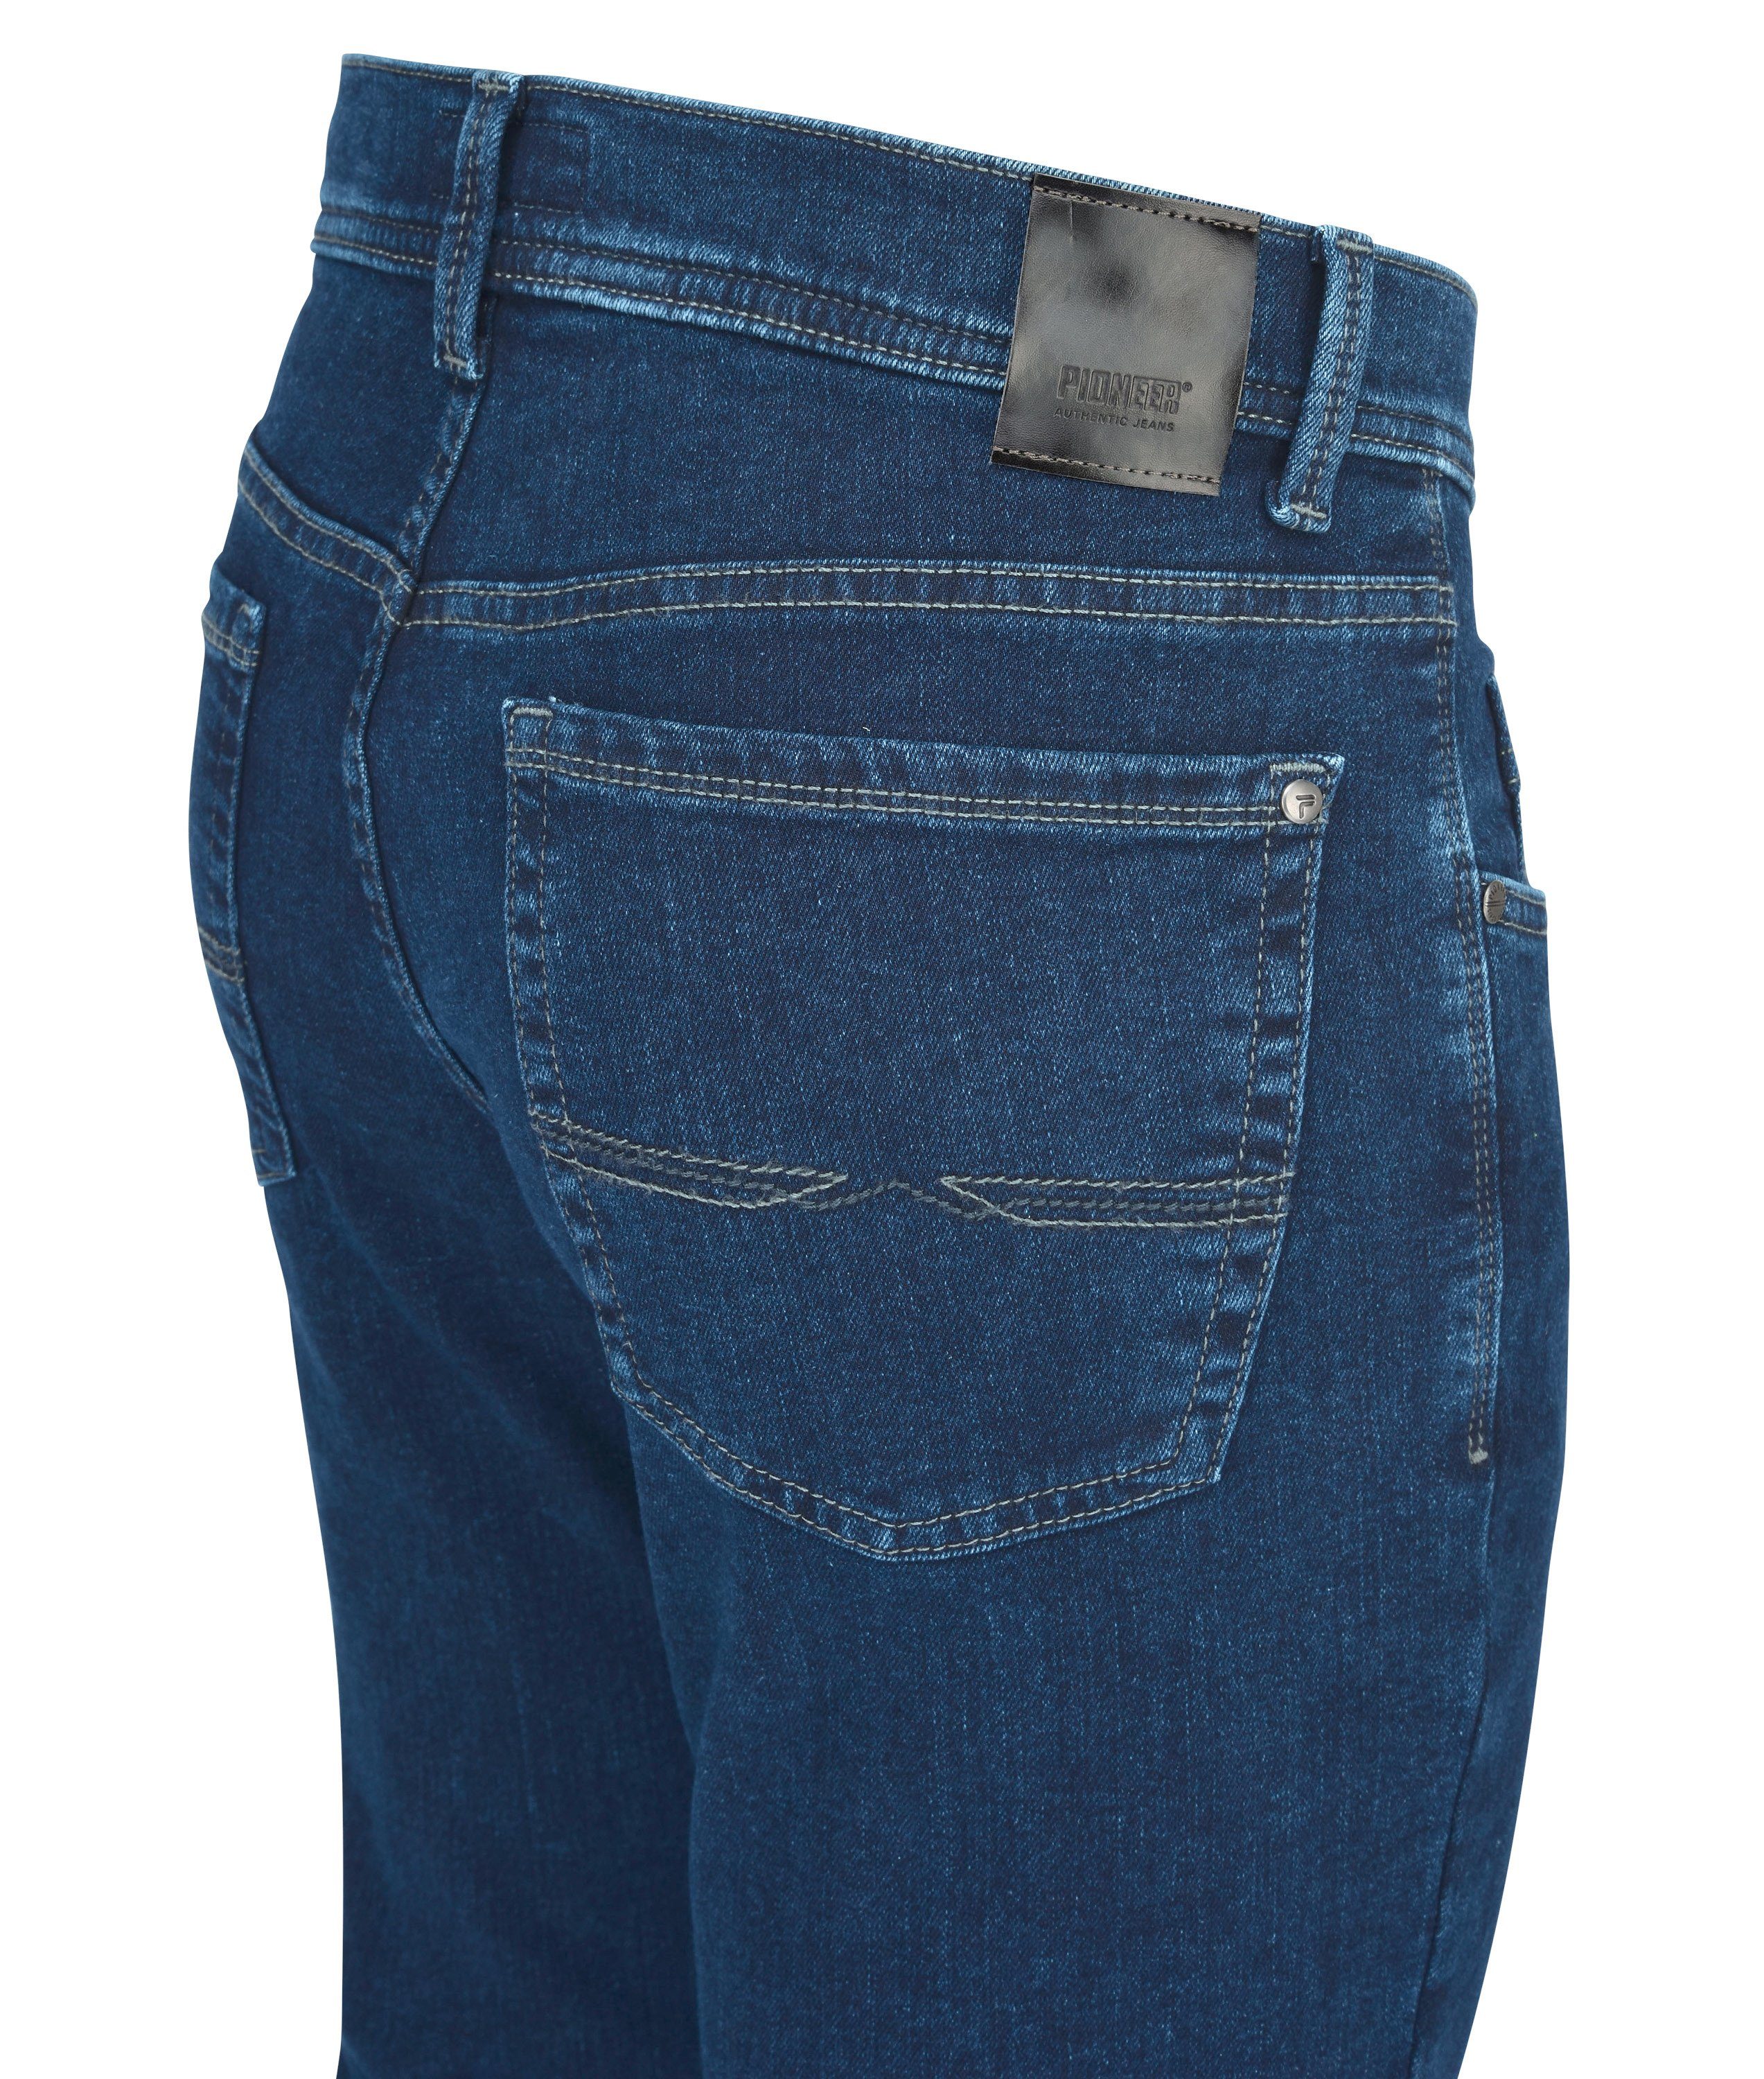 Pioneer Authentic - PIONEER denim 5-Pocket-Jeans RANDO Jeans THERMO blue 1680 9504.05